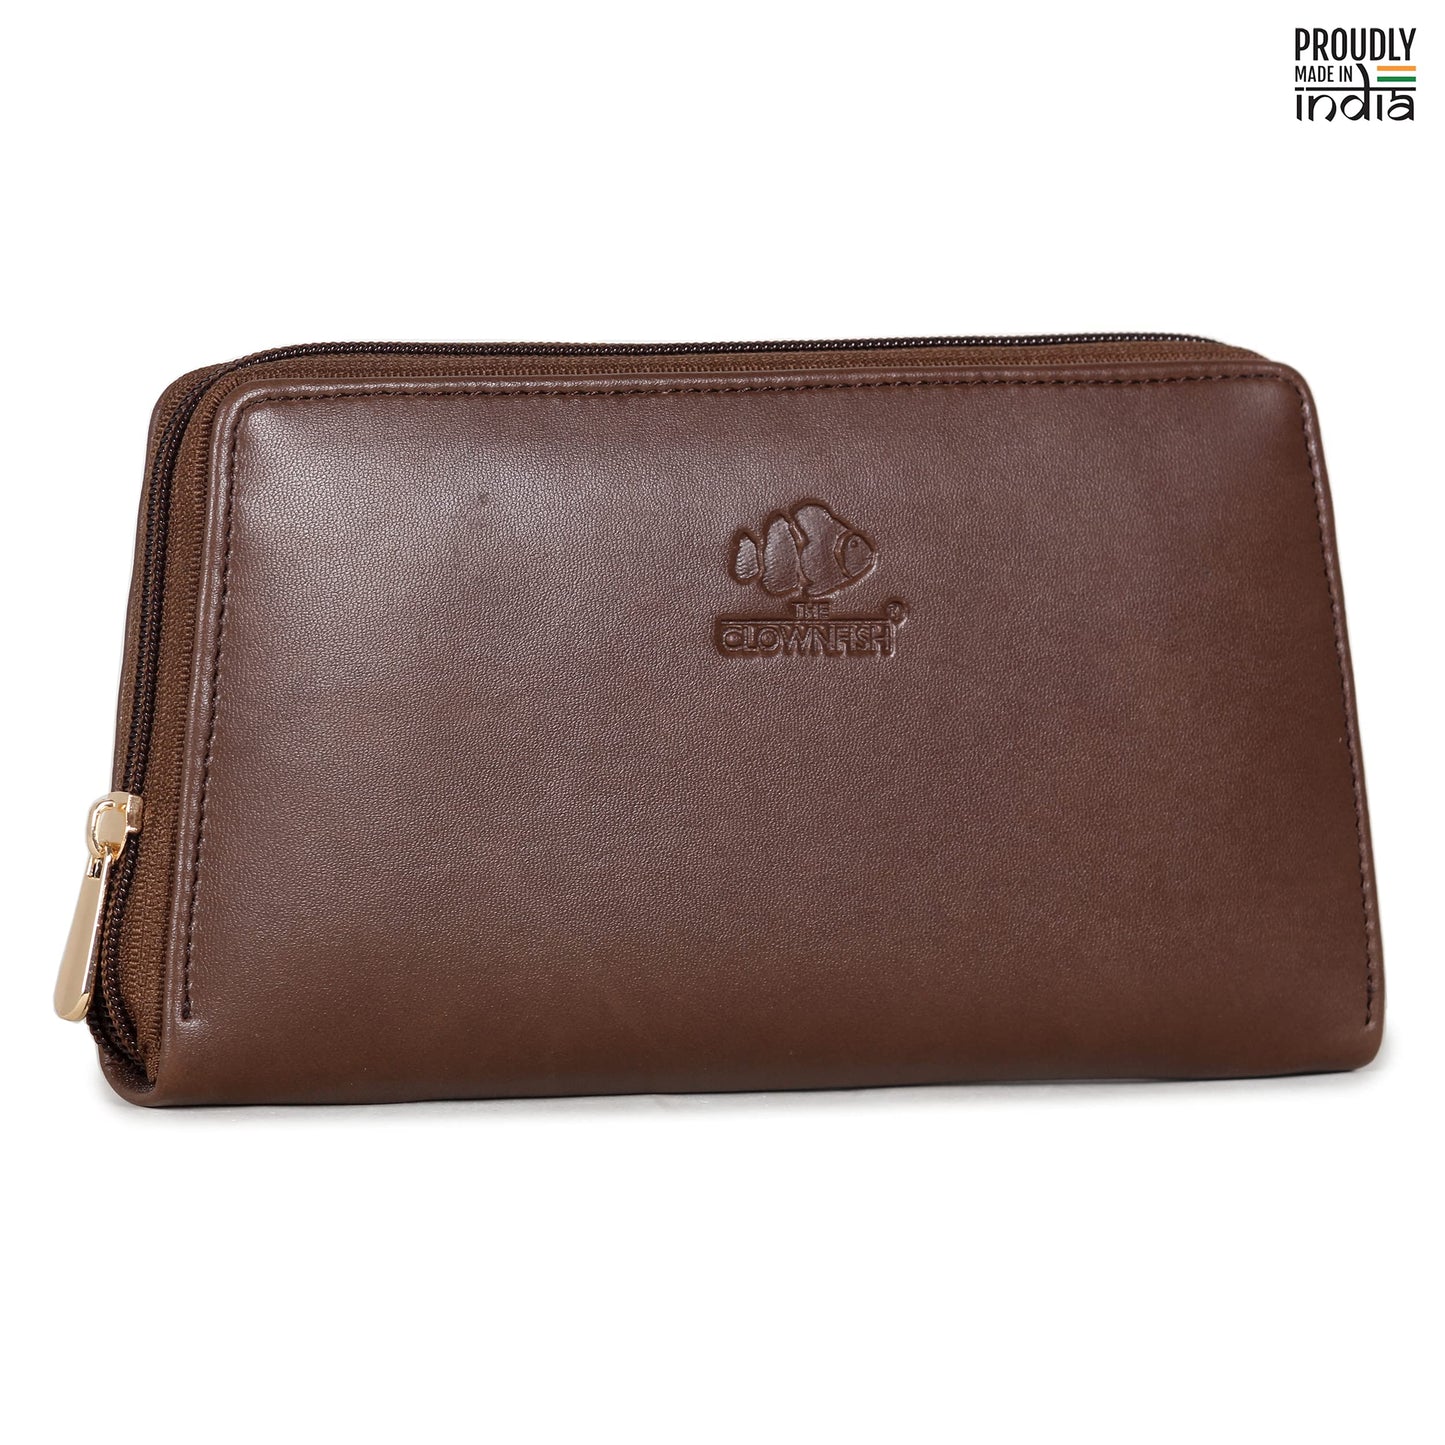 THE CLOWNFISH Evelyn Collection Womens Wallet Clutch Ladies Purse with Multiple Card Slots Dark Brown